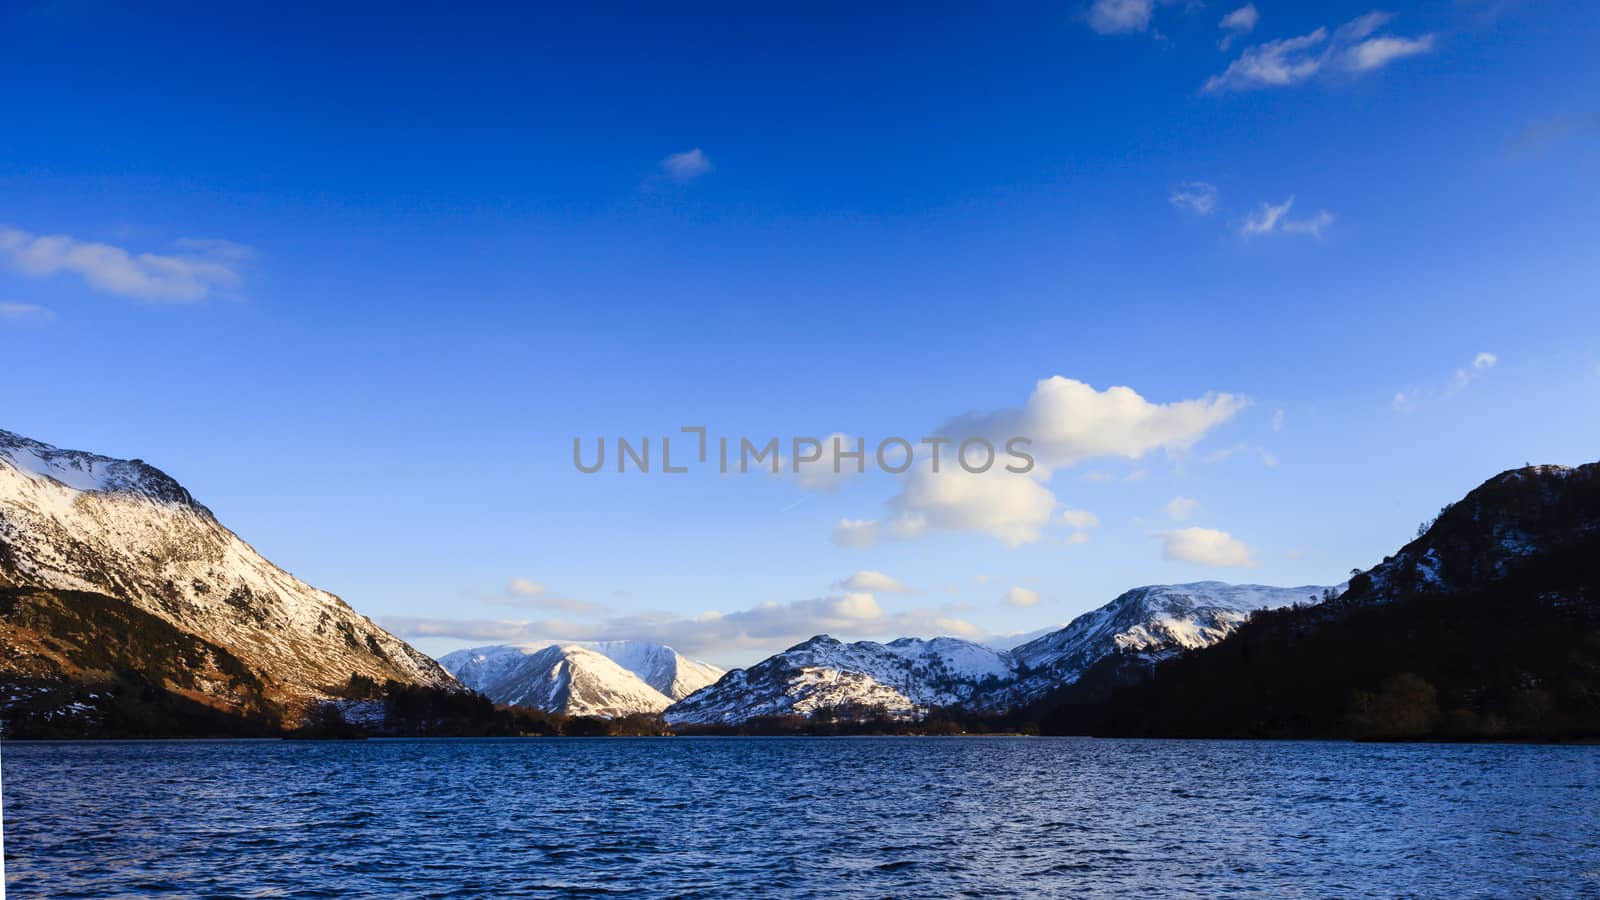 The view across Ullswater through Patterdale valley in the English Lake District national park.